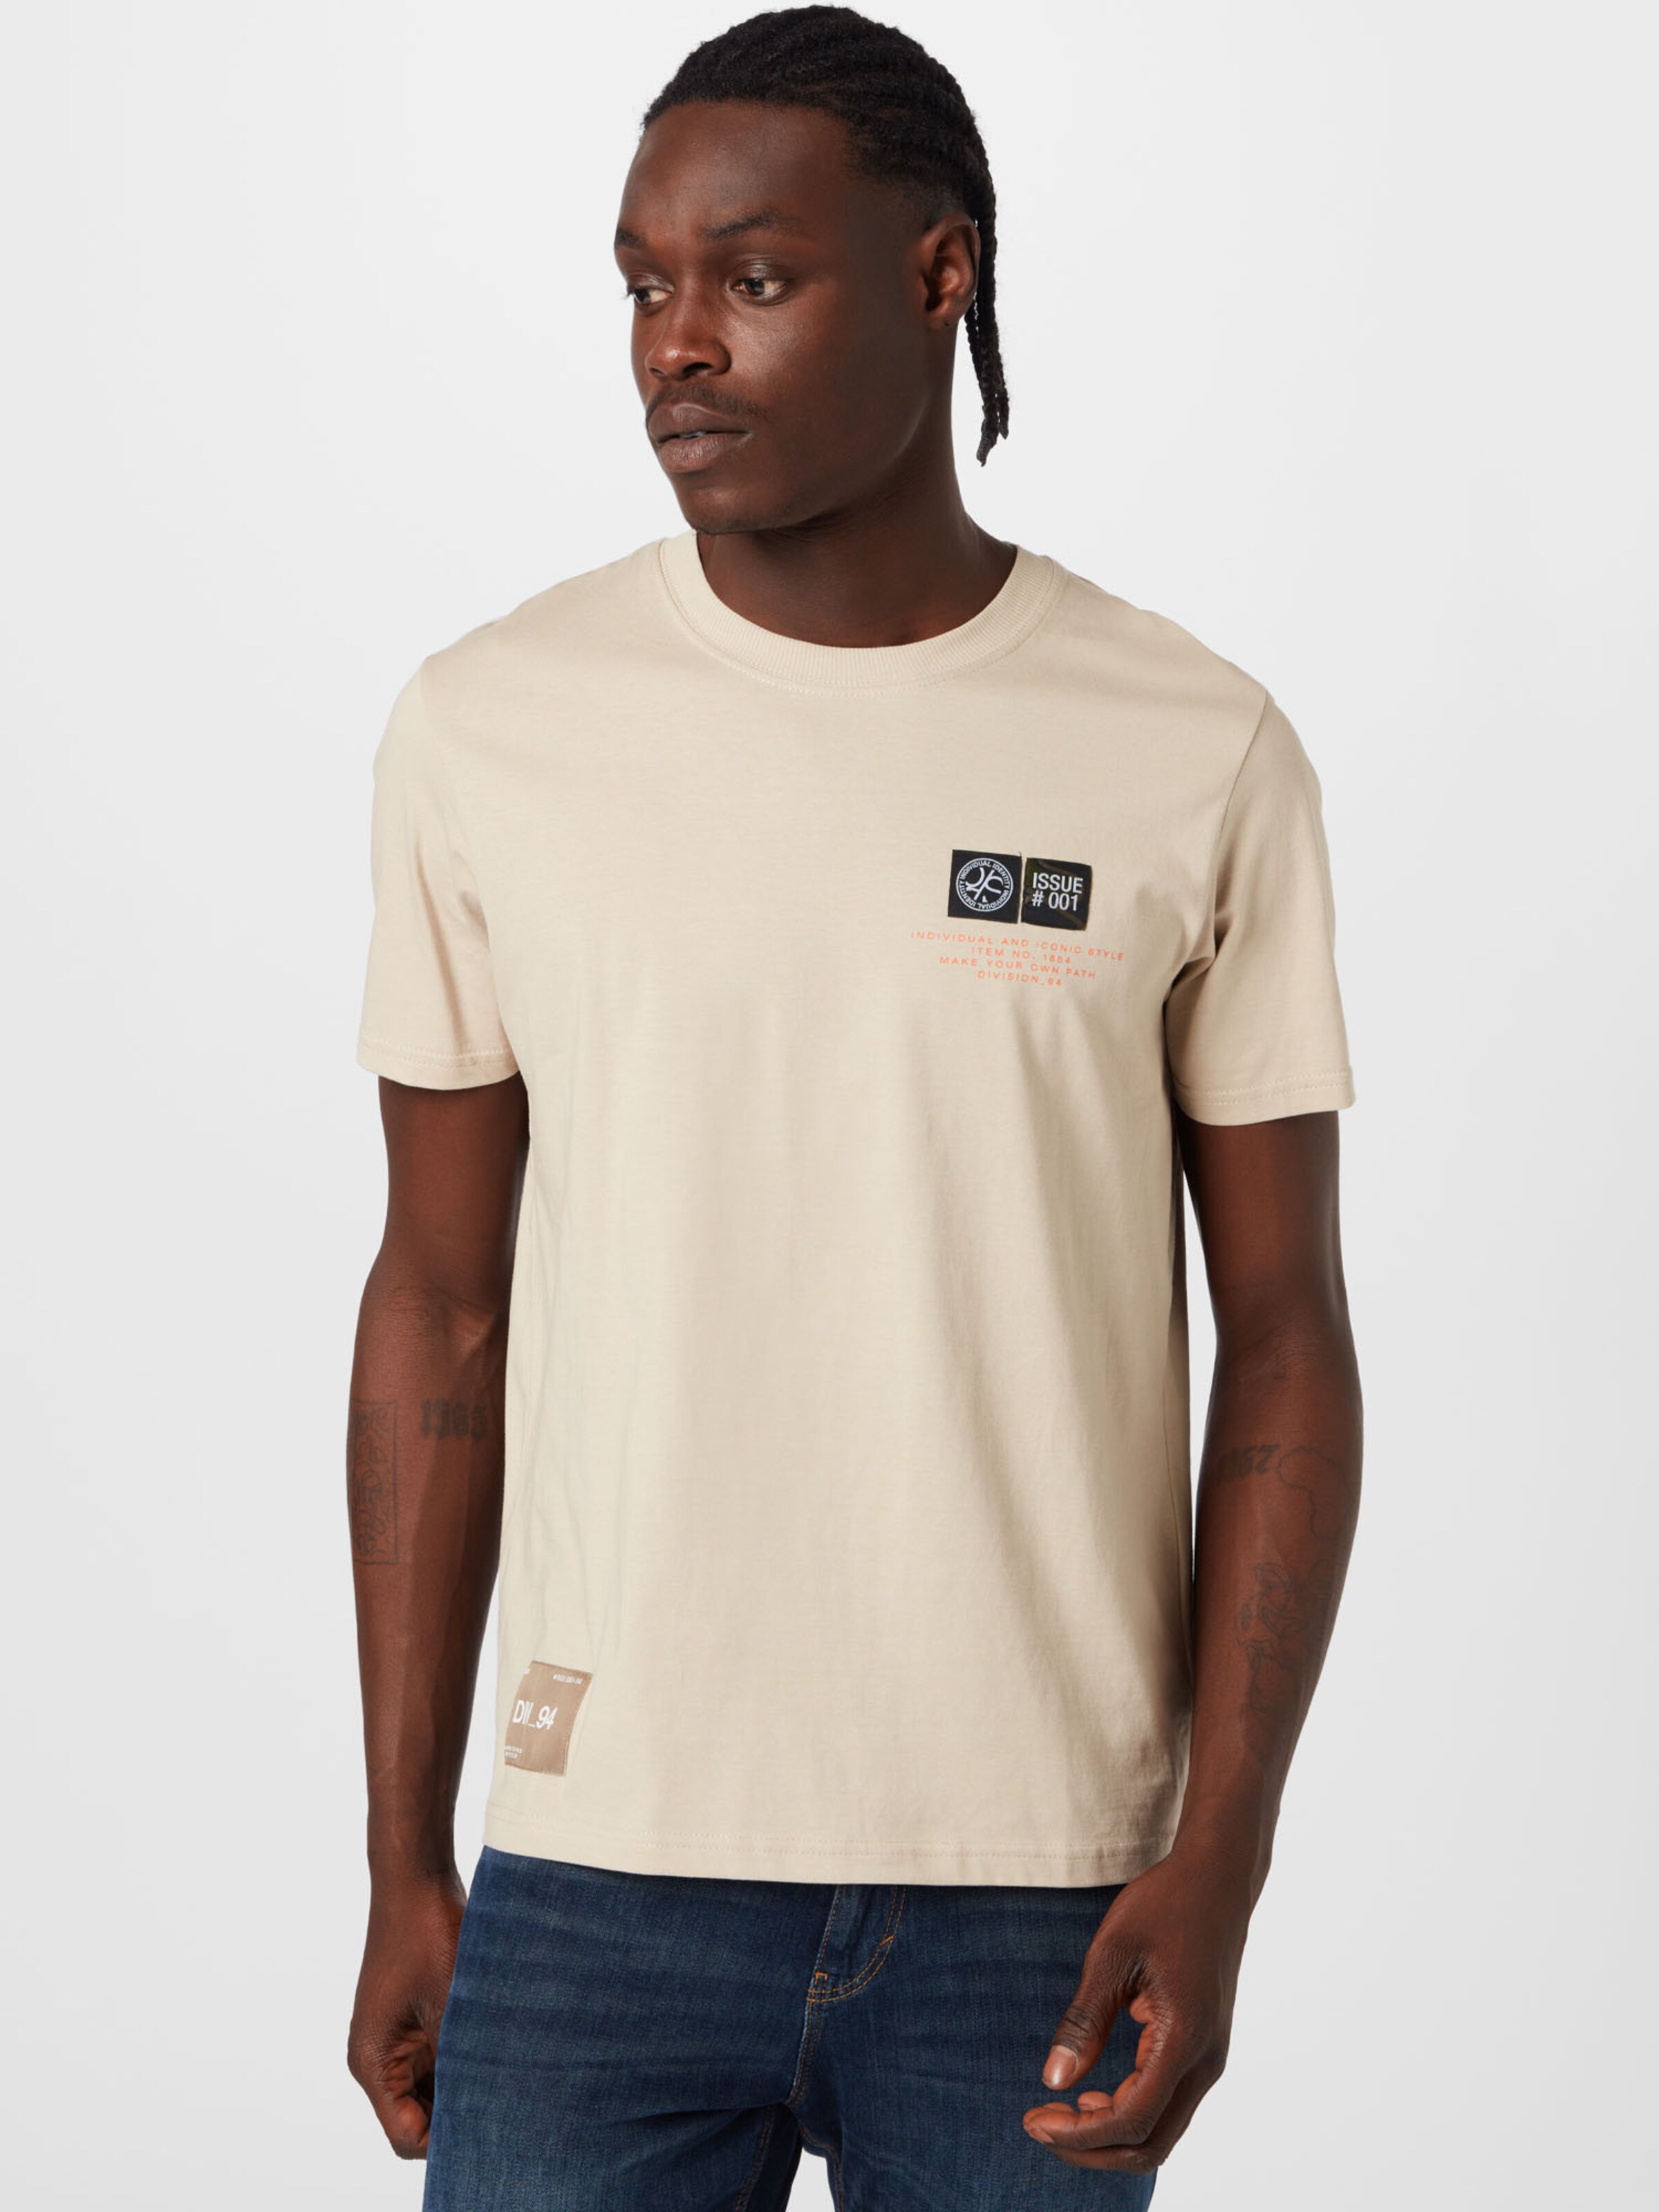 Männer Shirts QS by s.Oliver T-Shirt in Creme - MK90860